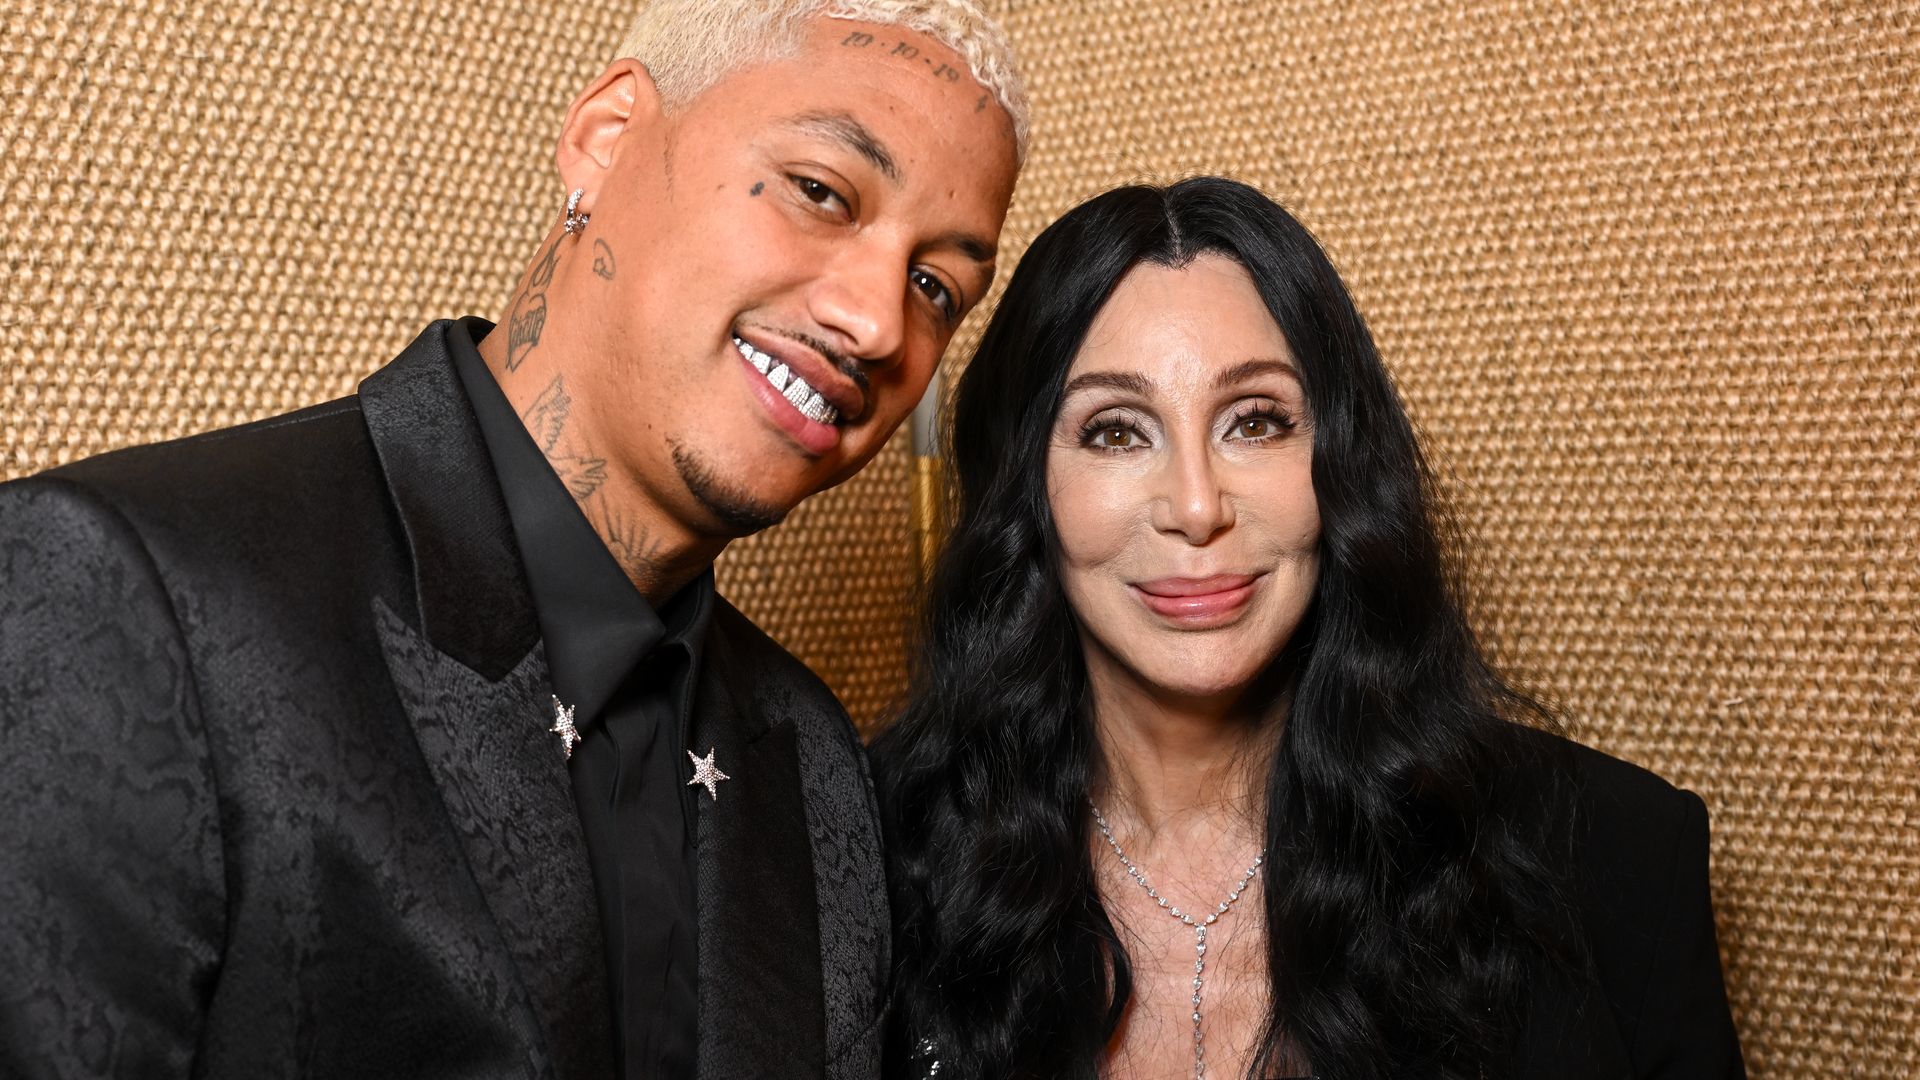 Cher, 77, looks incredible as she twins with boyfriend Alexander Edward, 38, in stylish outfit